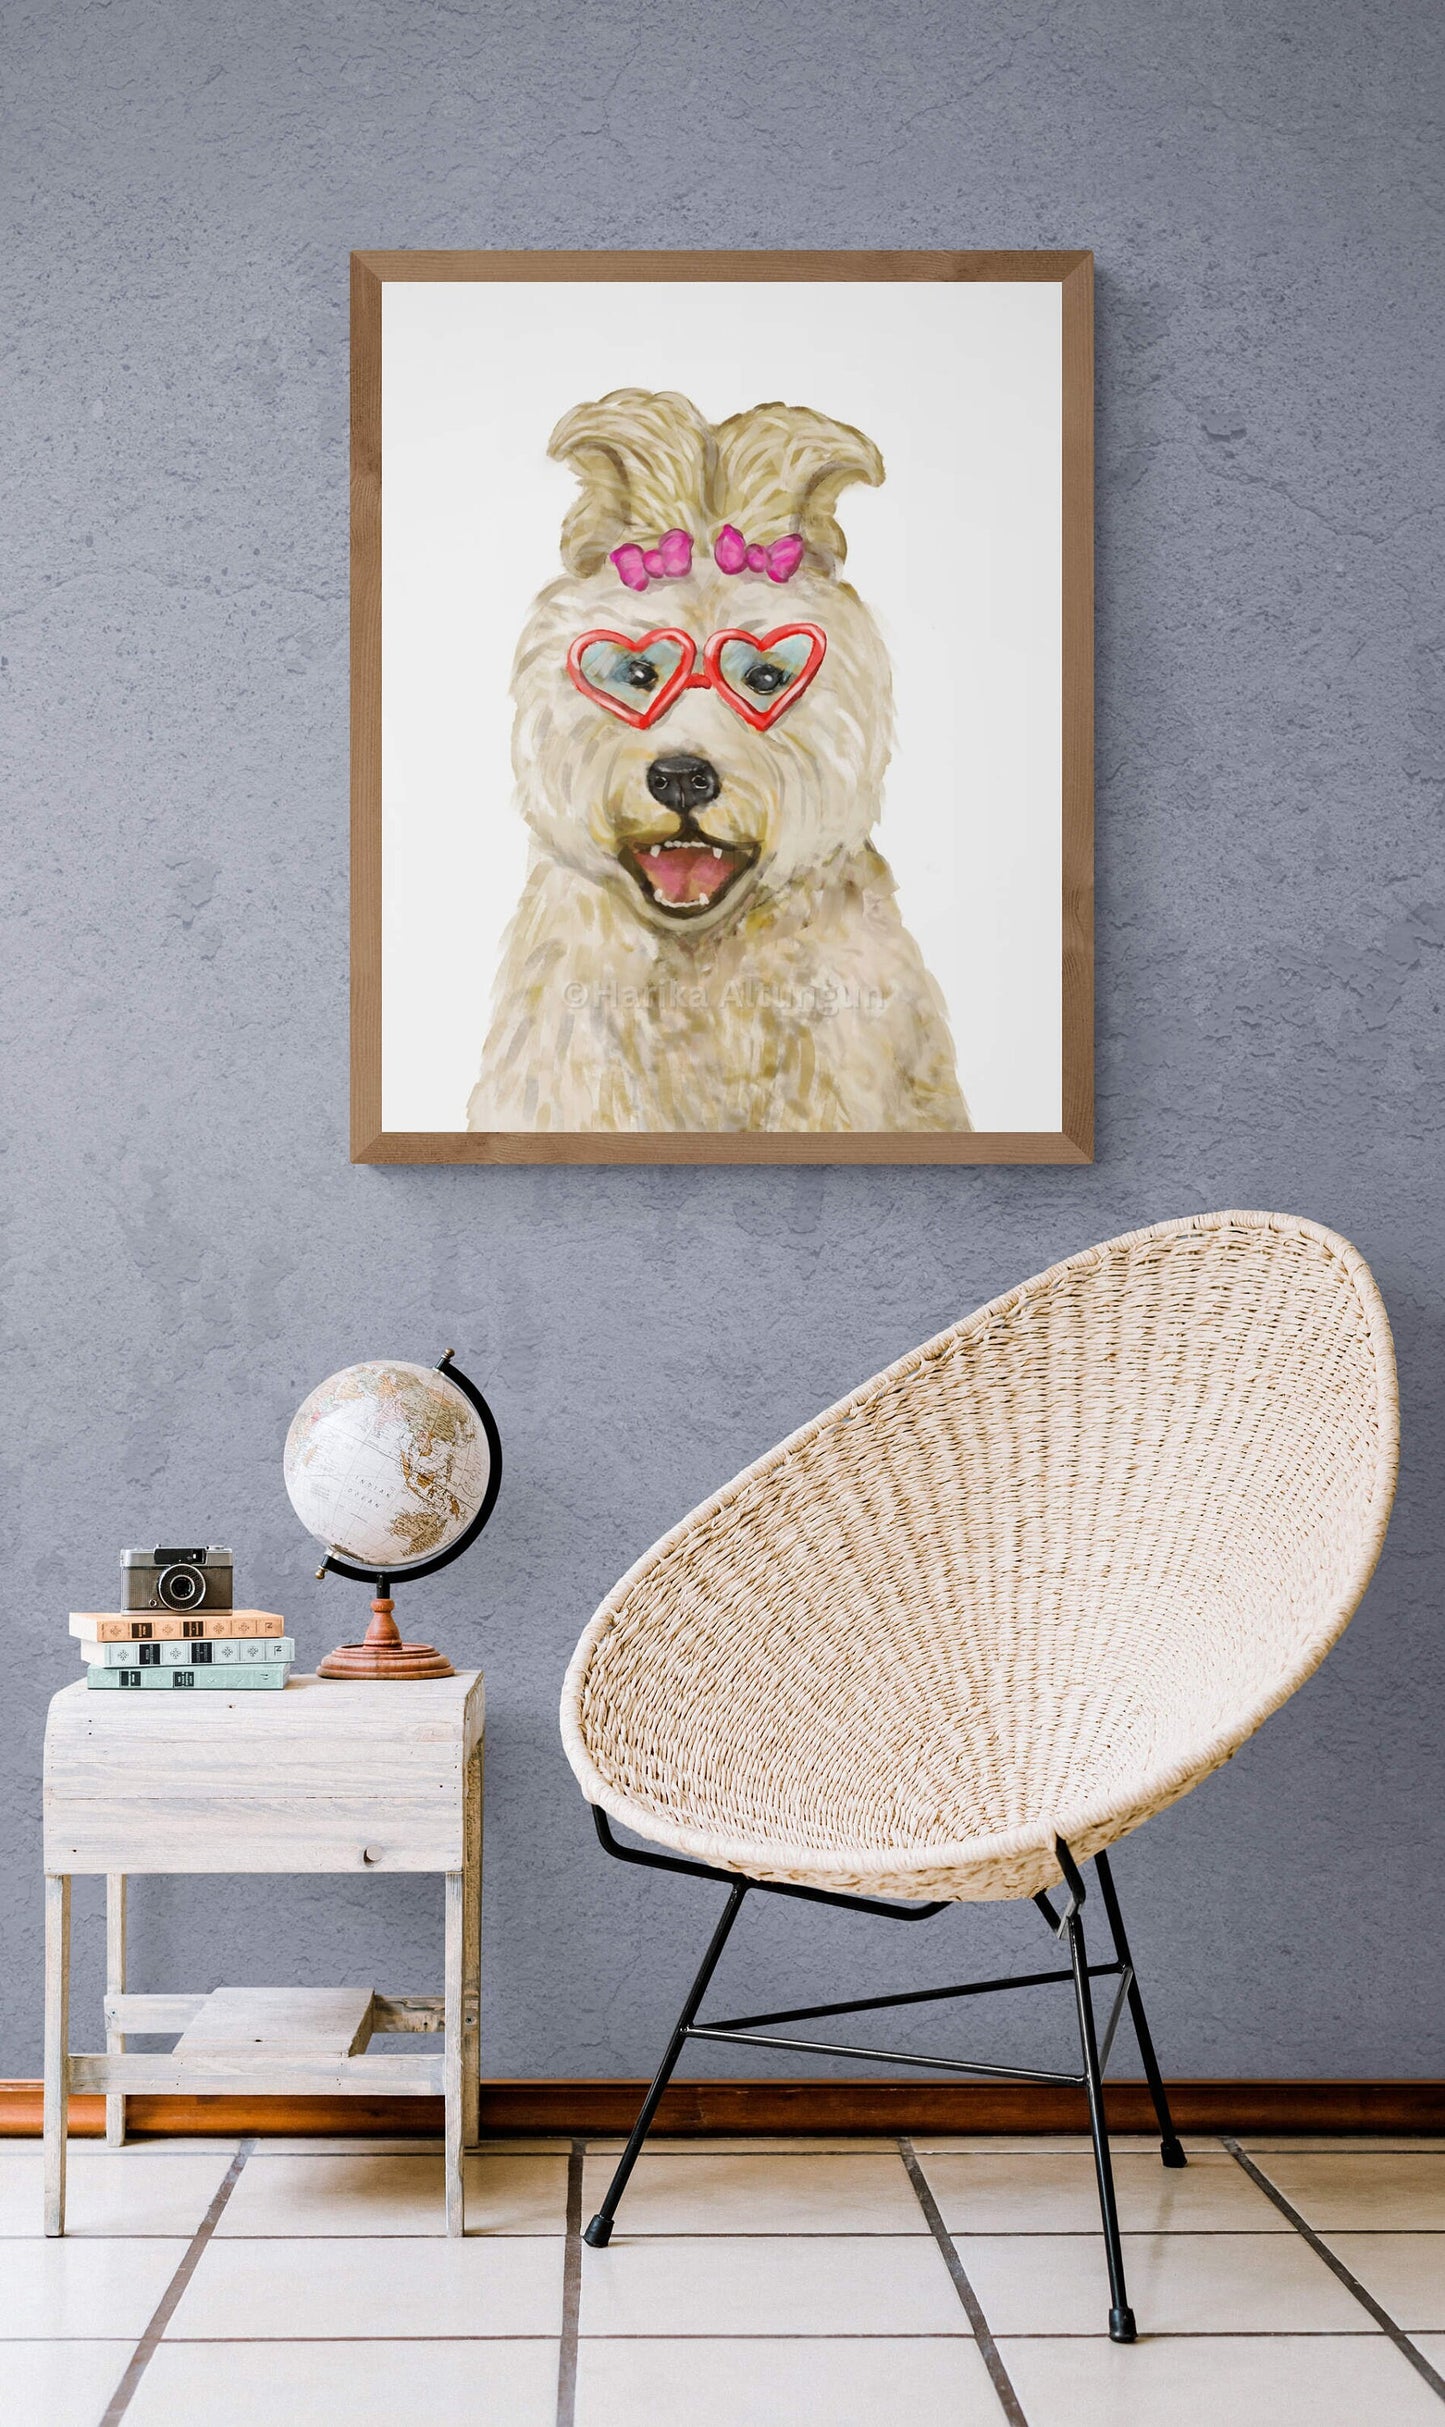 Good Hair Day Goldendoodle Print, Cute Dog Print, Kids Wall Art, Dog Memorial Painting, Cream Dog With Red Glasses Print, Animal Lover Gift